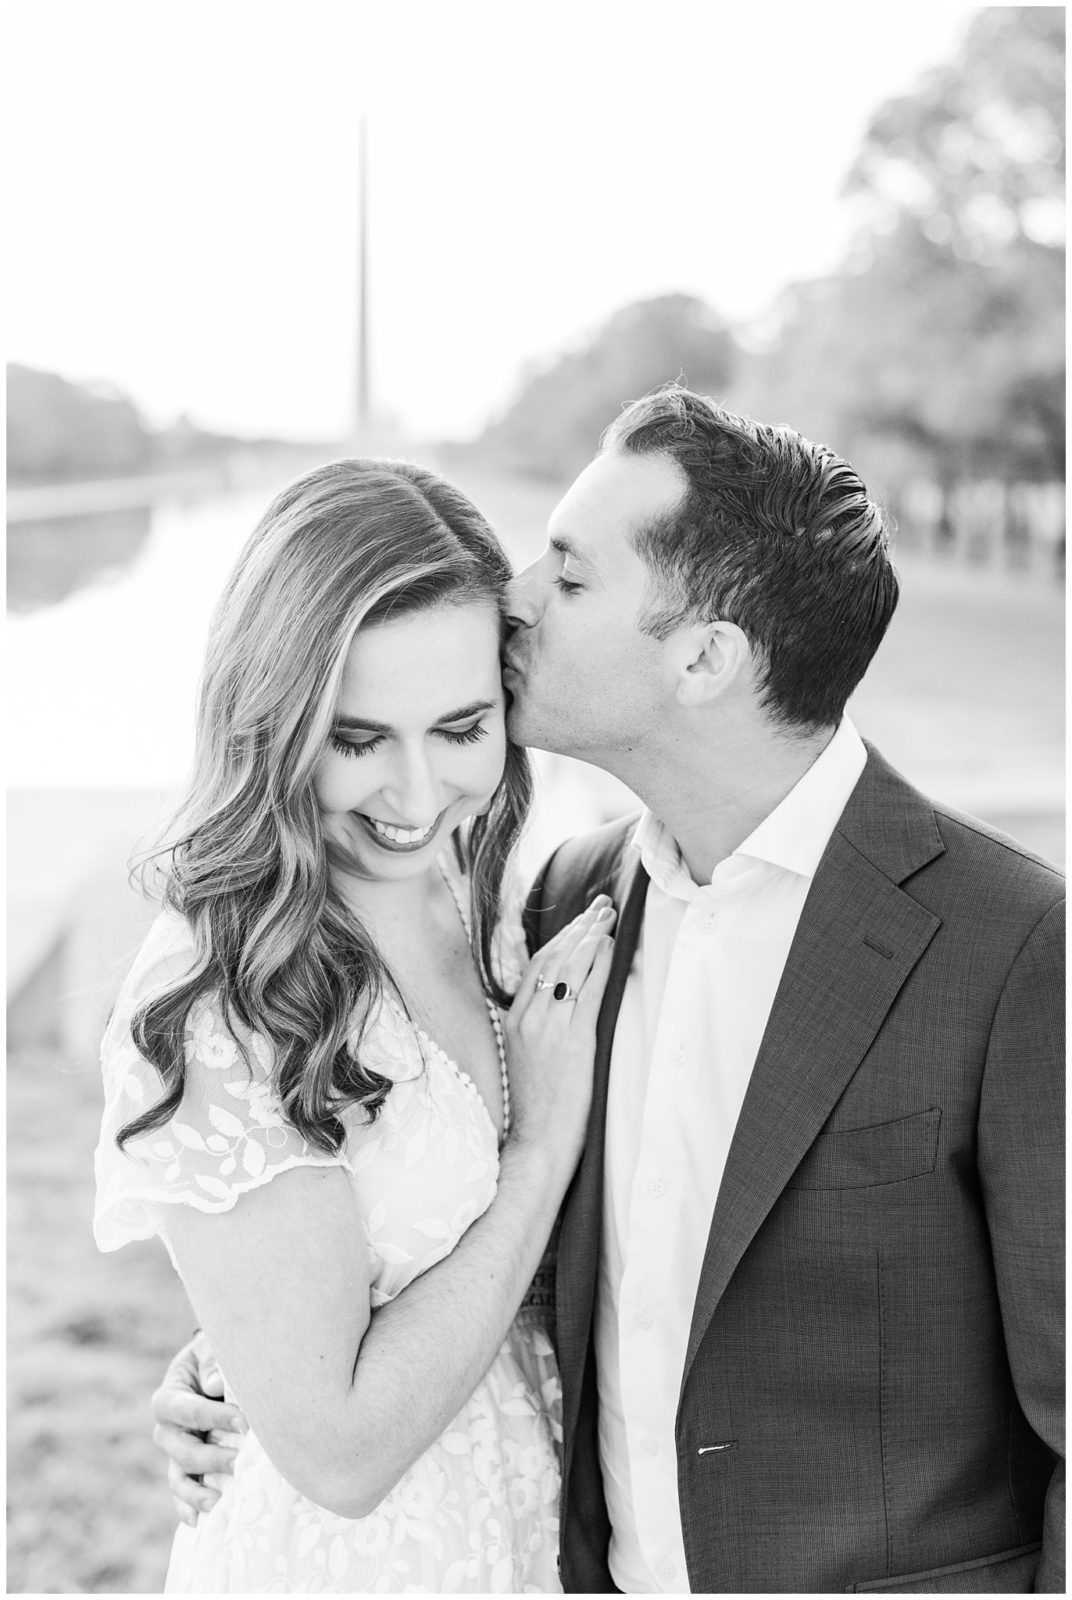 Katie and Max | A Sunrise Engagement Session at the Lincoln Memorial ...